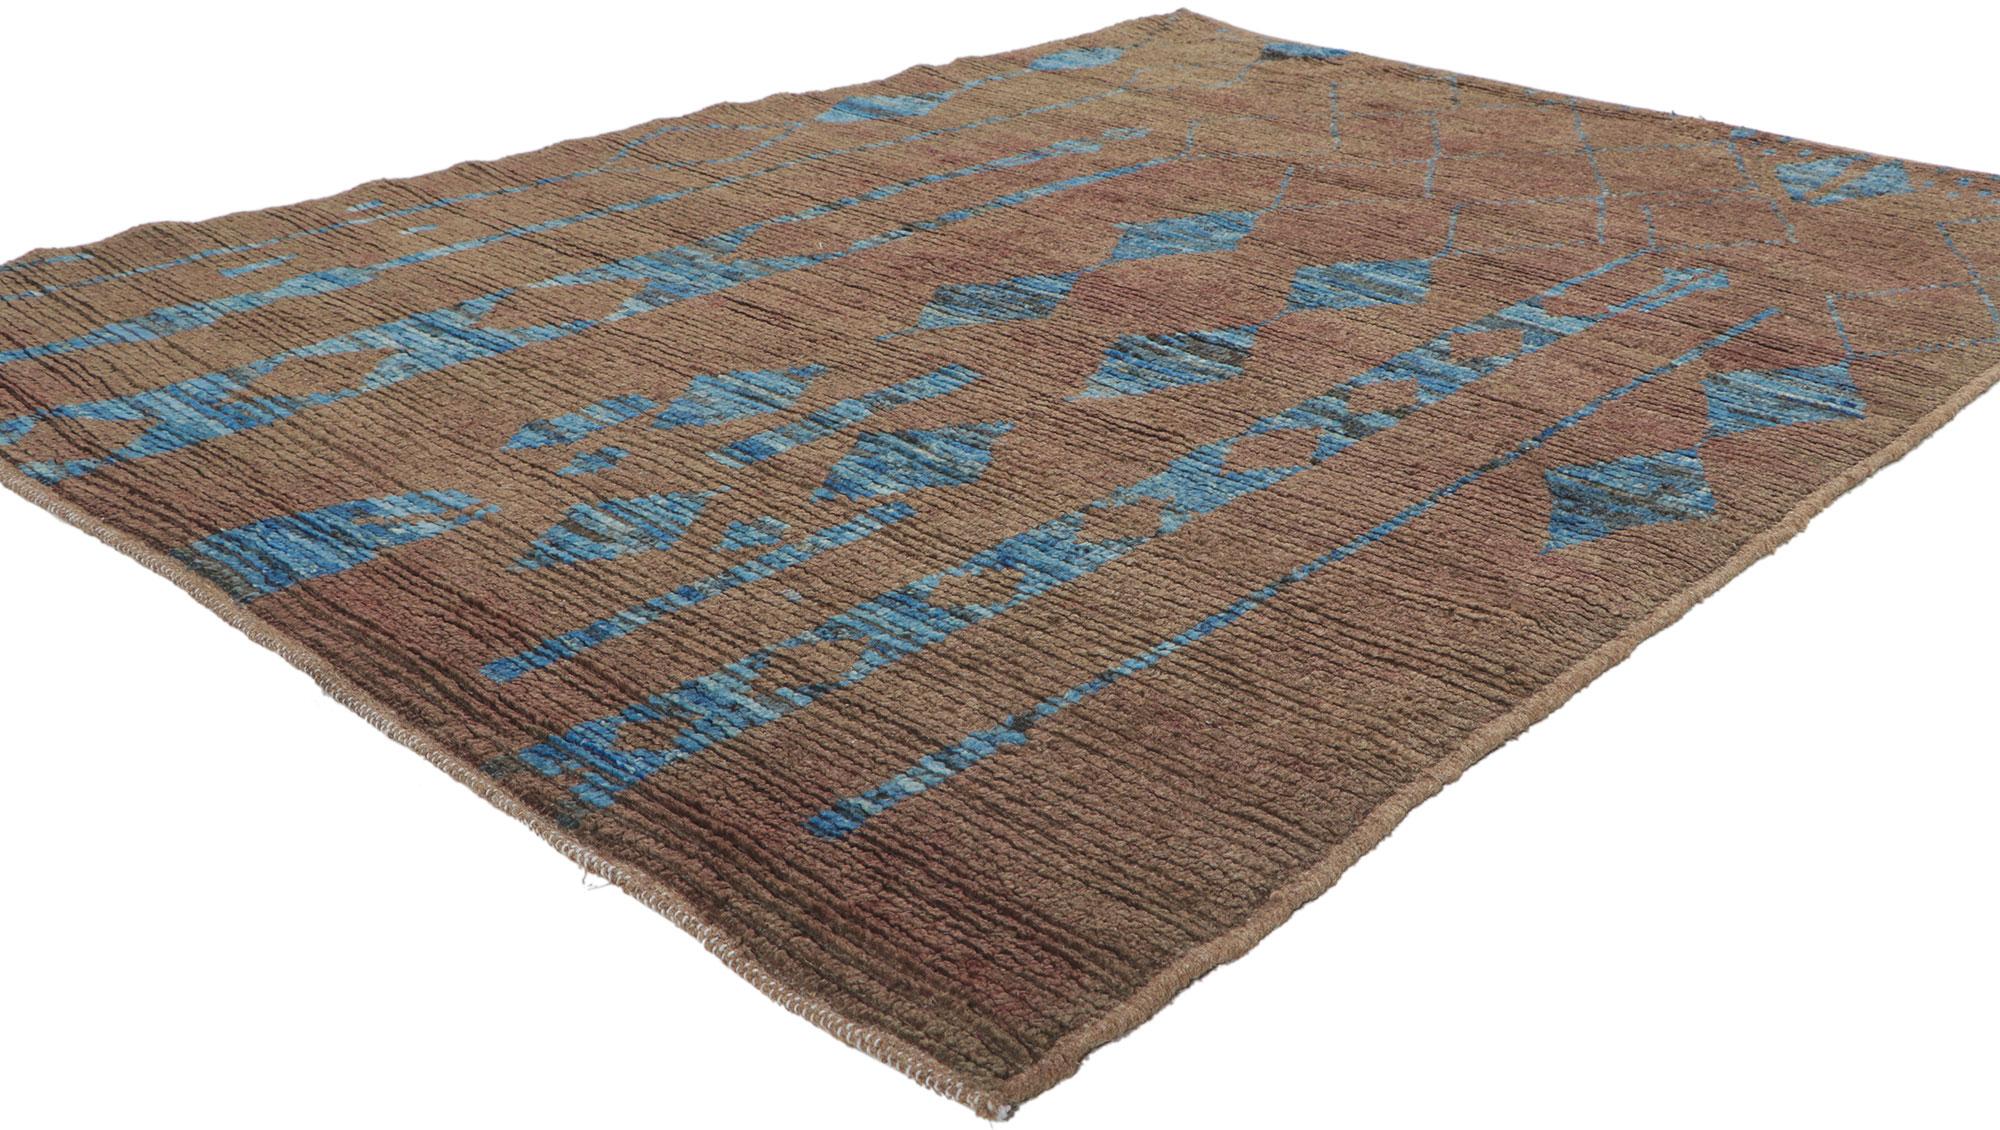 80782 New Moroccan Rug with Modern Nomadic Charm 04'09 x 06'06. ​With its nomadic charm, incredible detail and texture, this hand knotted wool contemporary Moroccan rug is a captivating vision of woven beauty. The eye-catching tribal design and